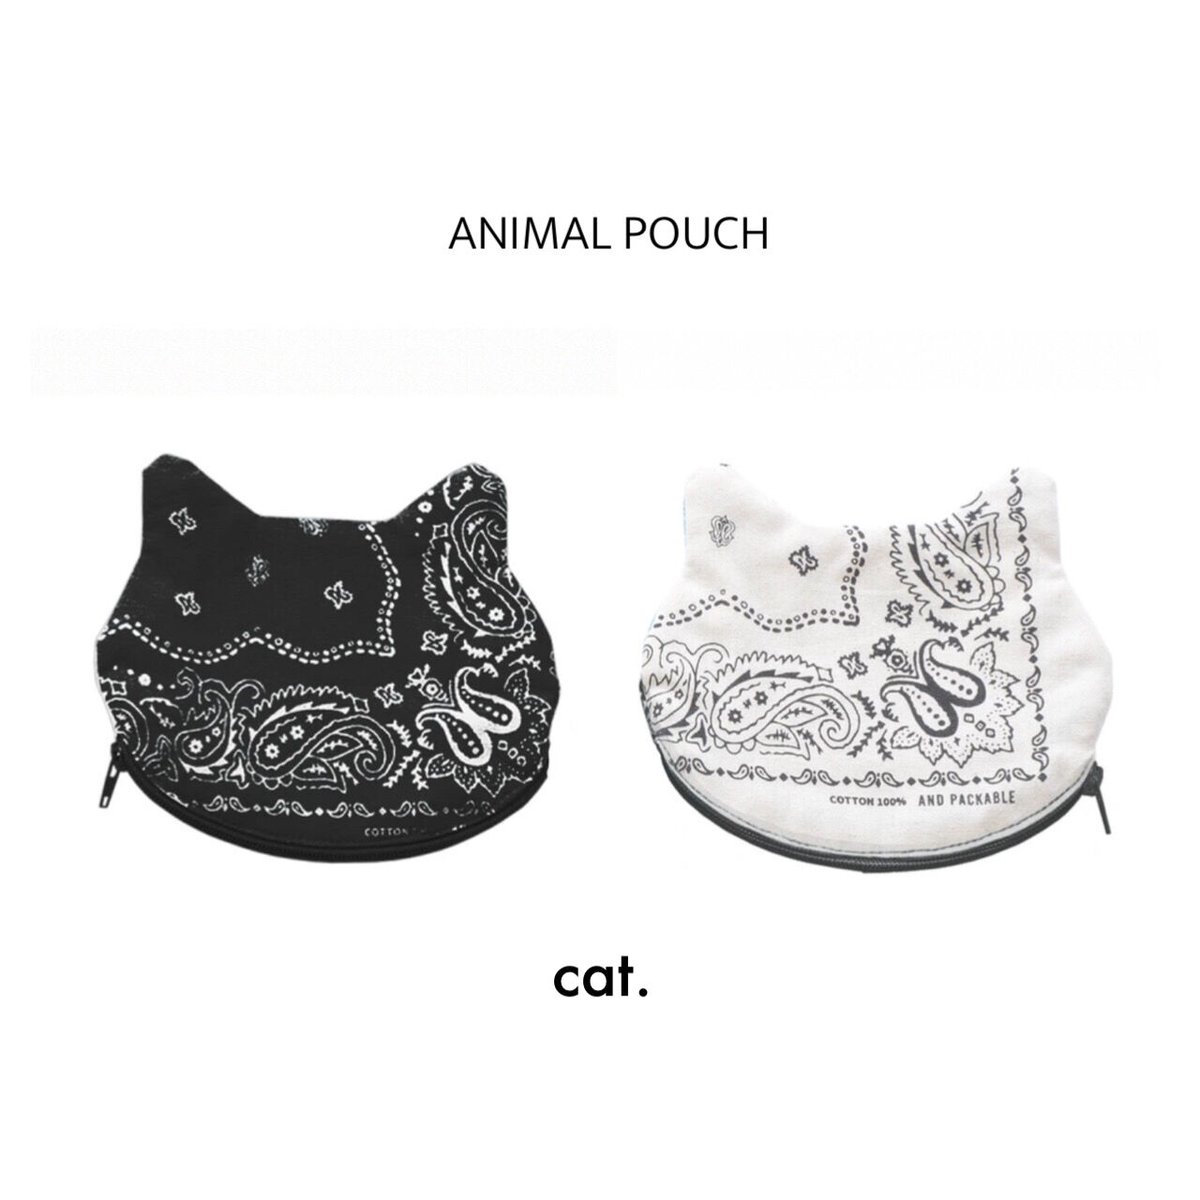 ANIMAL POUCH ［ ペイズリー柄 / ポーチ ］メイク道具収納 鍵 小物収納 ...